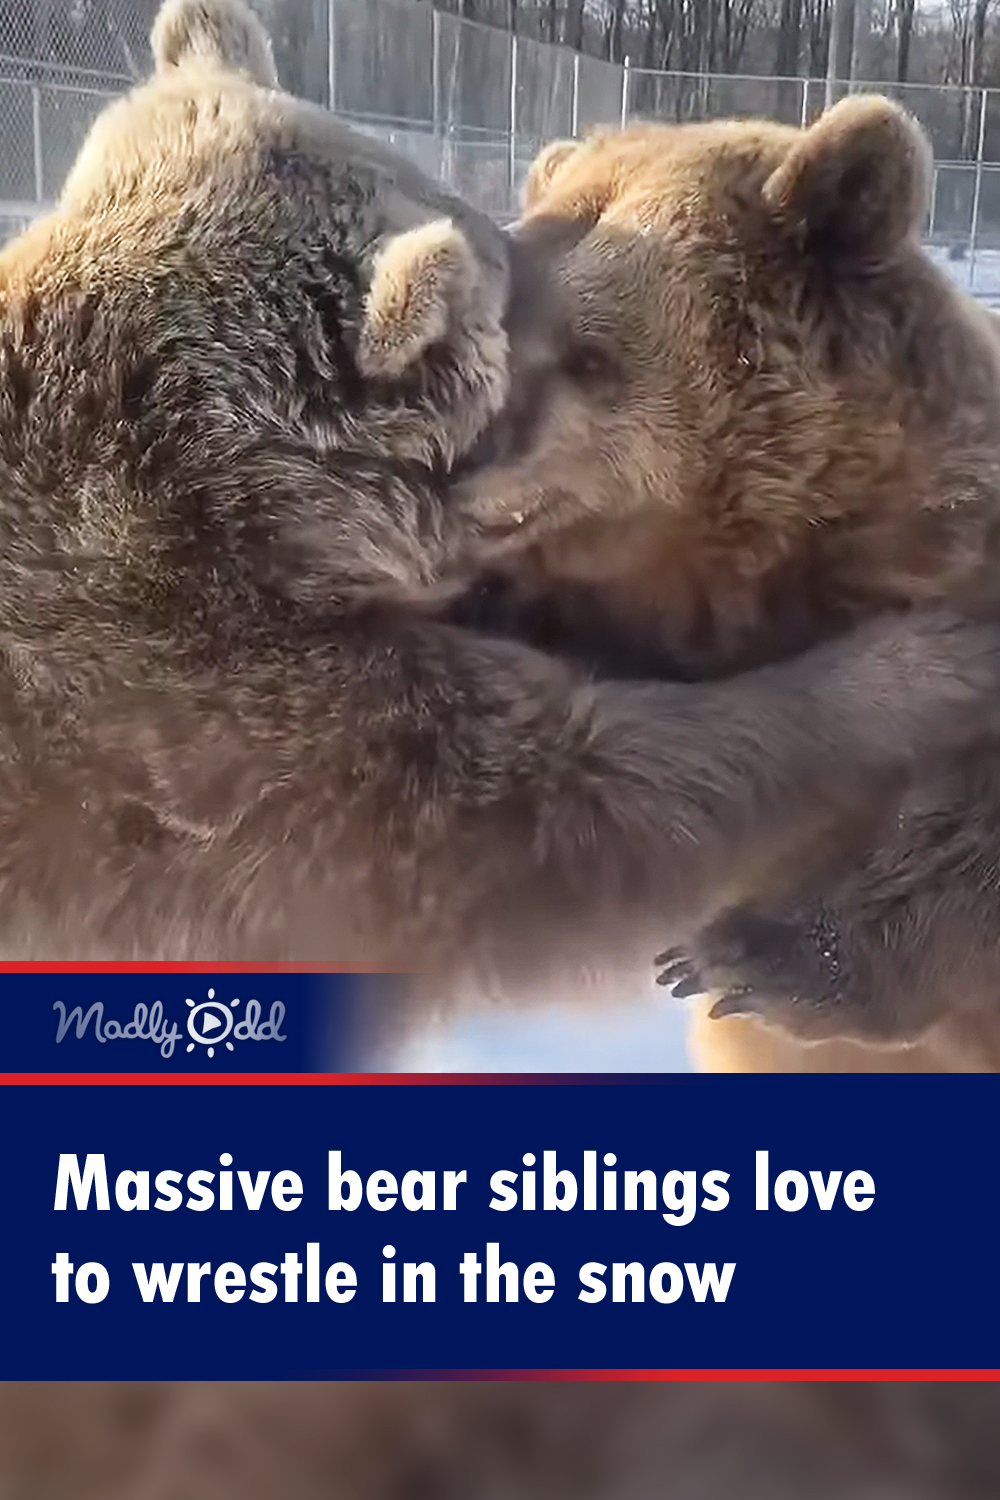 Massive bear siblings love to wrestle in the snow